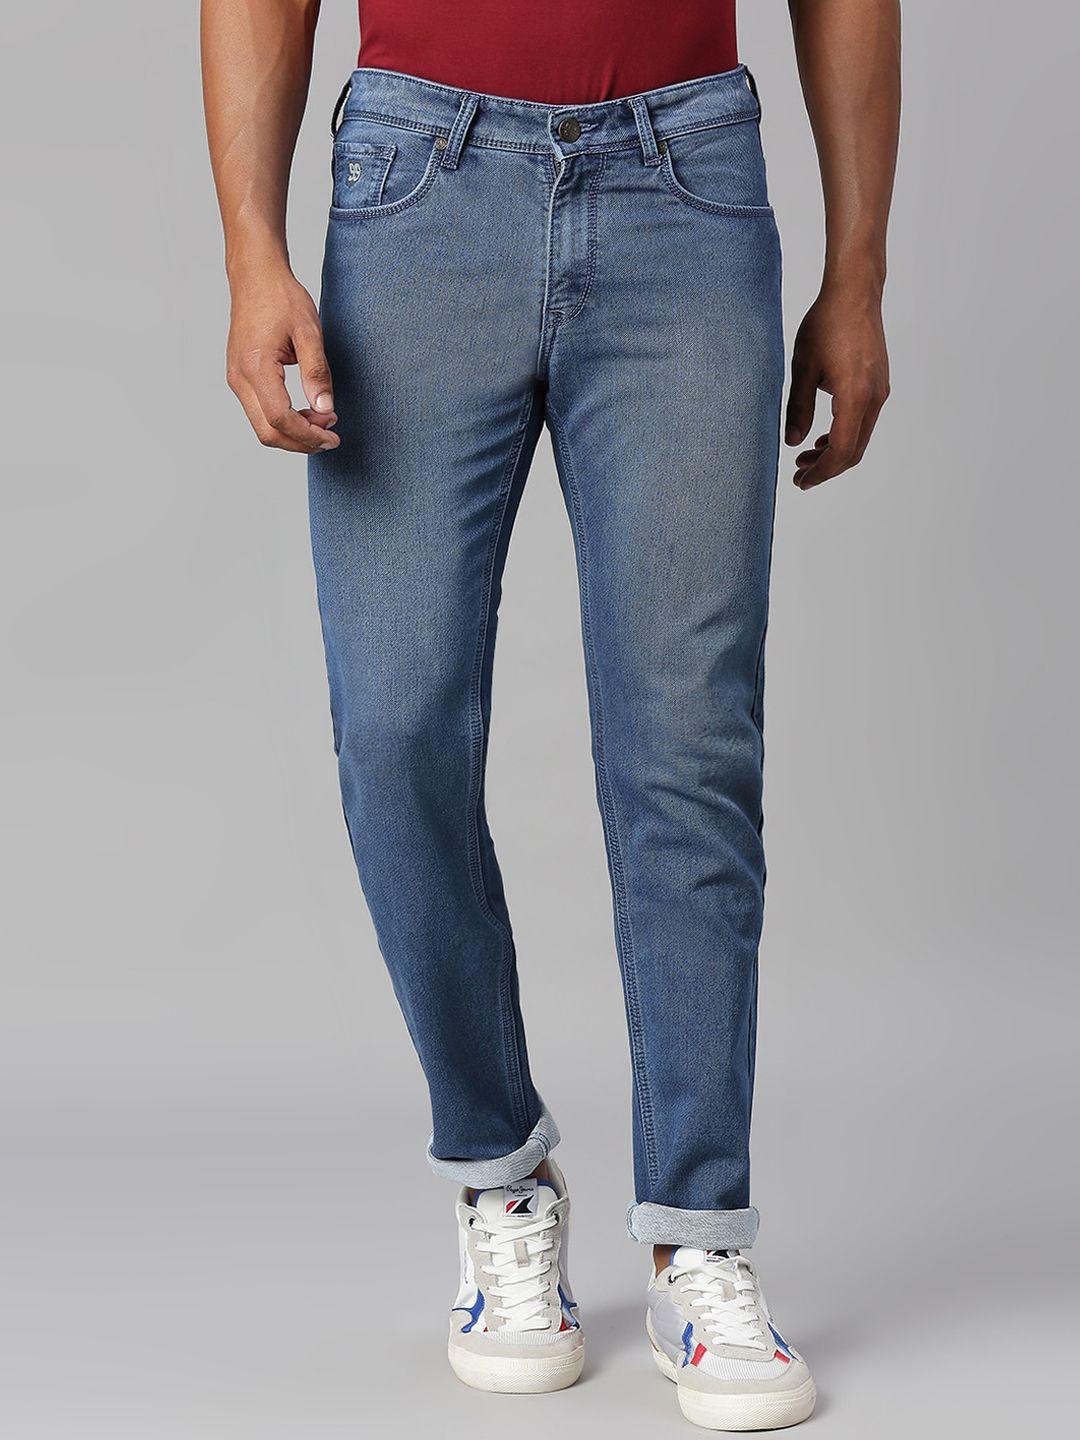 hj-hasasi-men-slim-fit-heavy-fade-stretchable-cotton-jeans